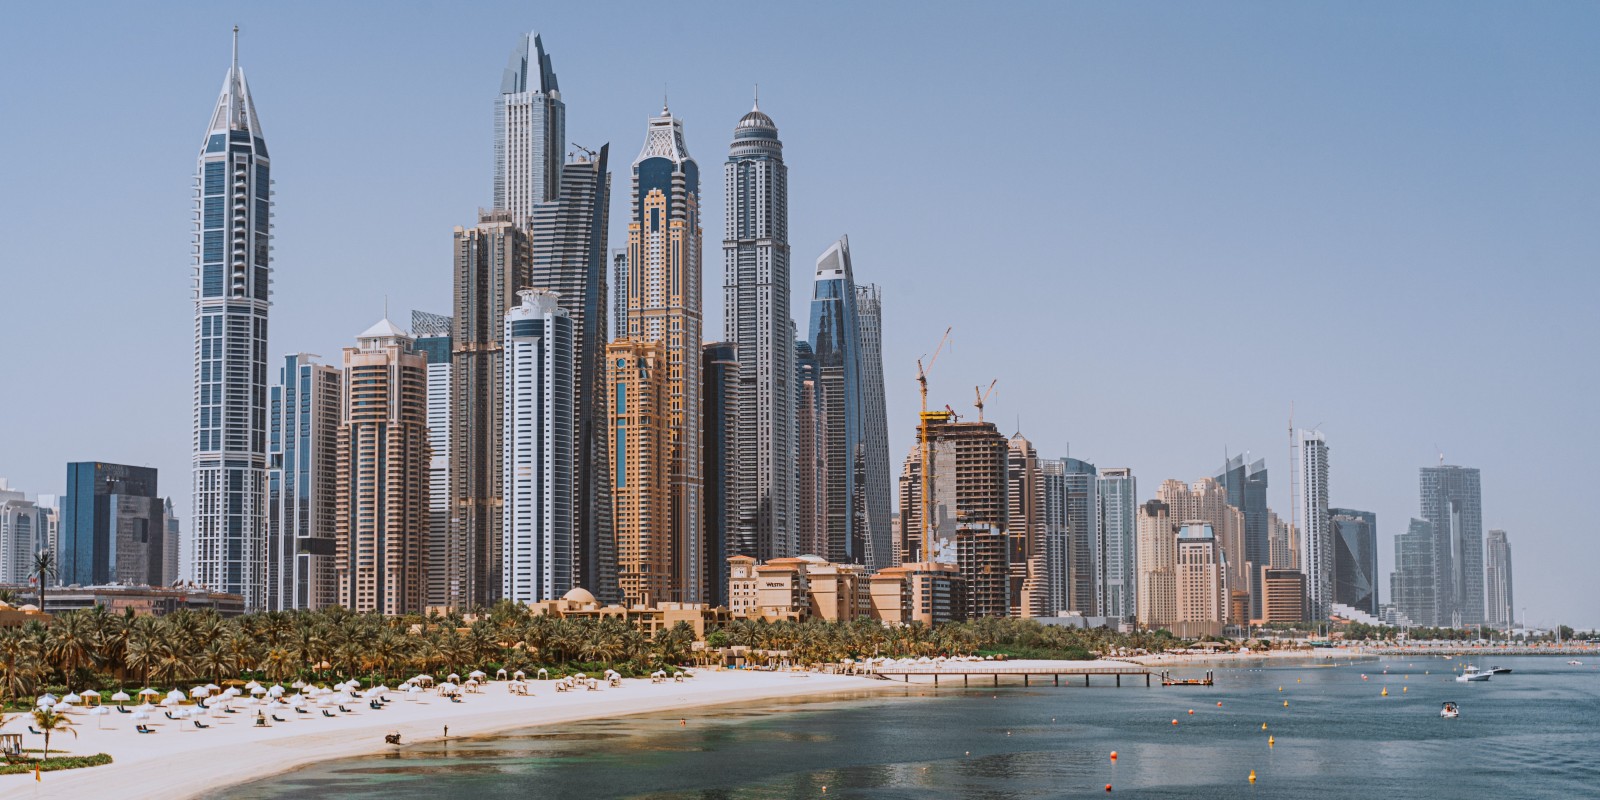 Travel blog: 15 Fascinating Things You Didn’t Know About The UAE